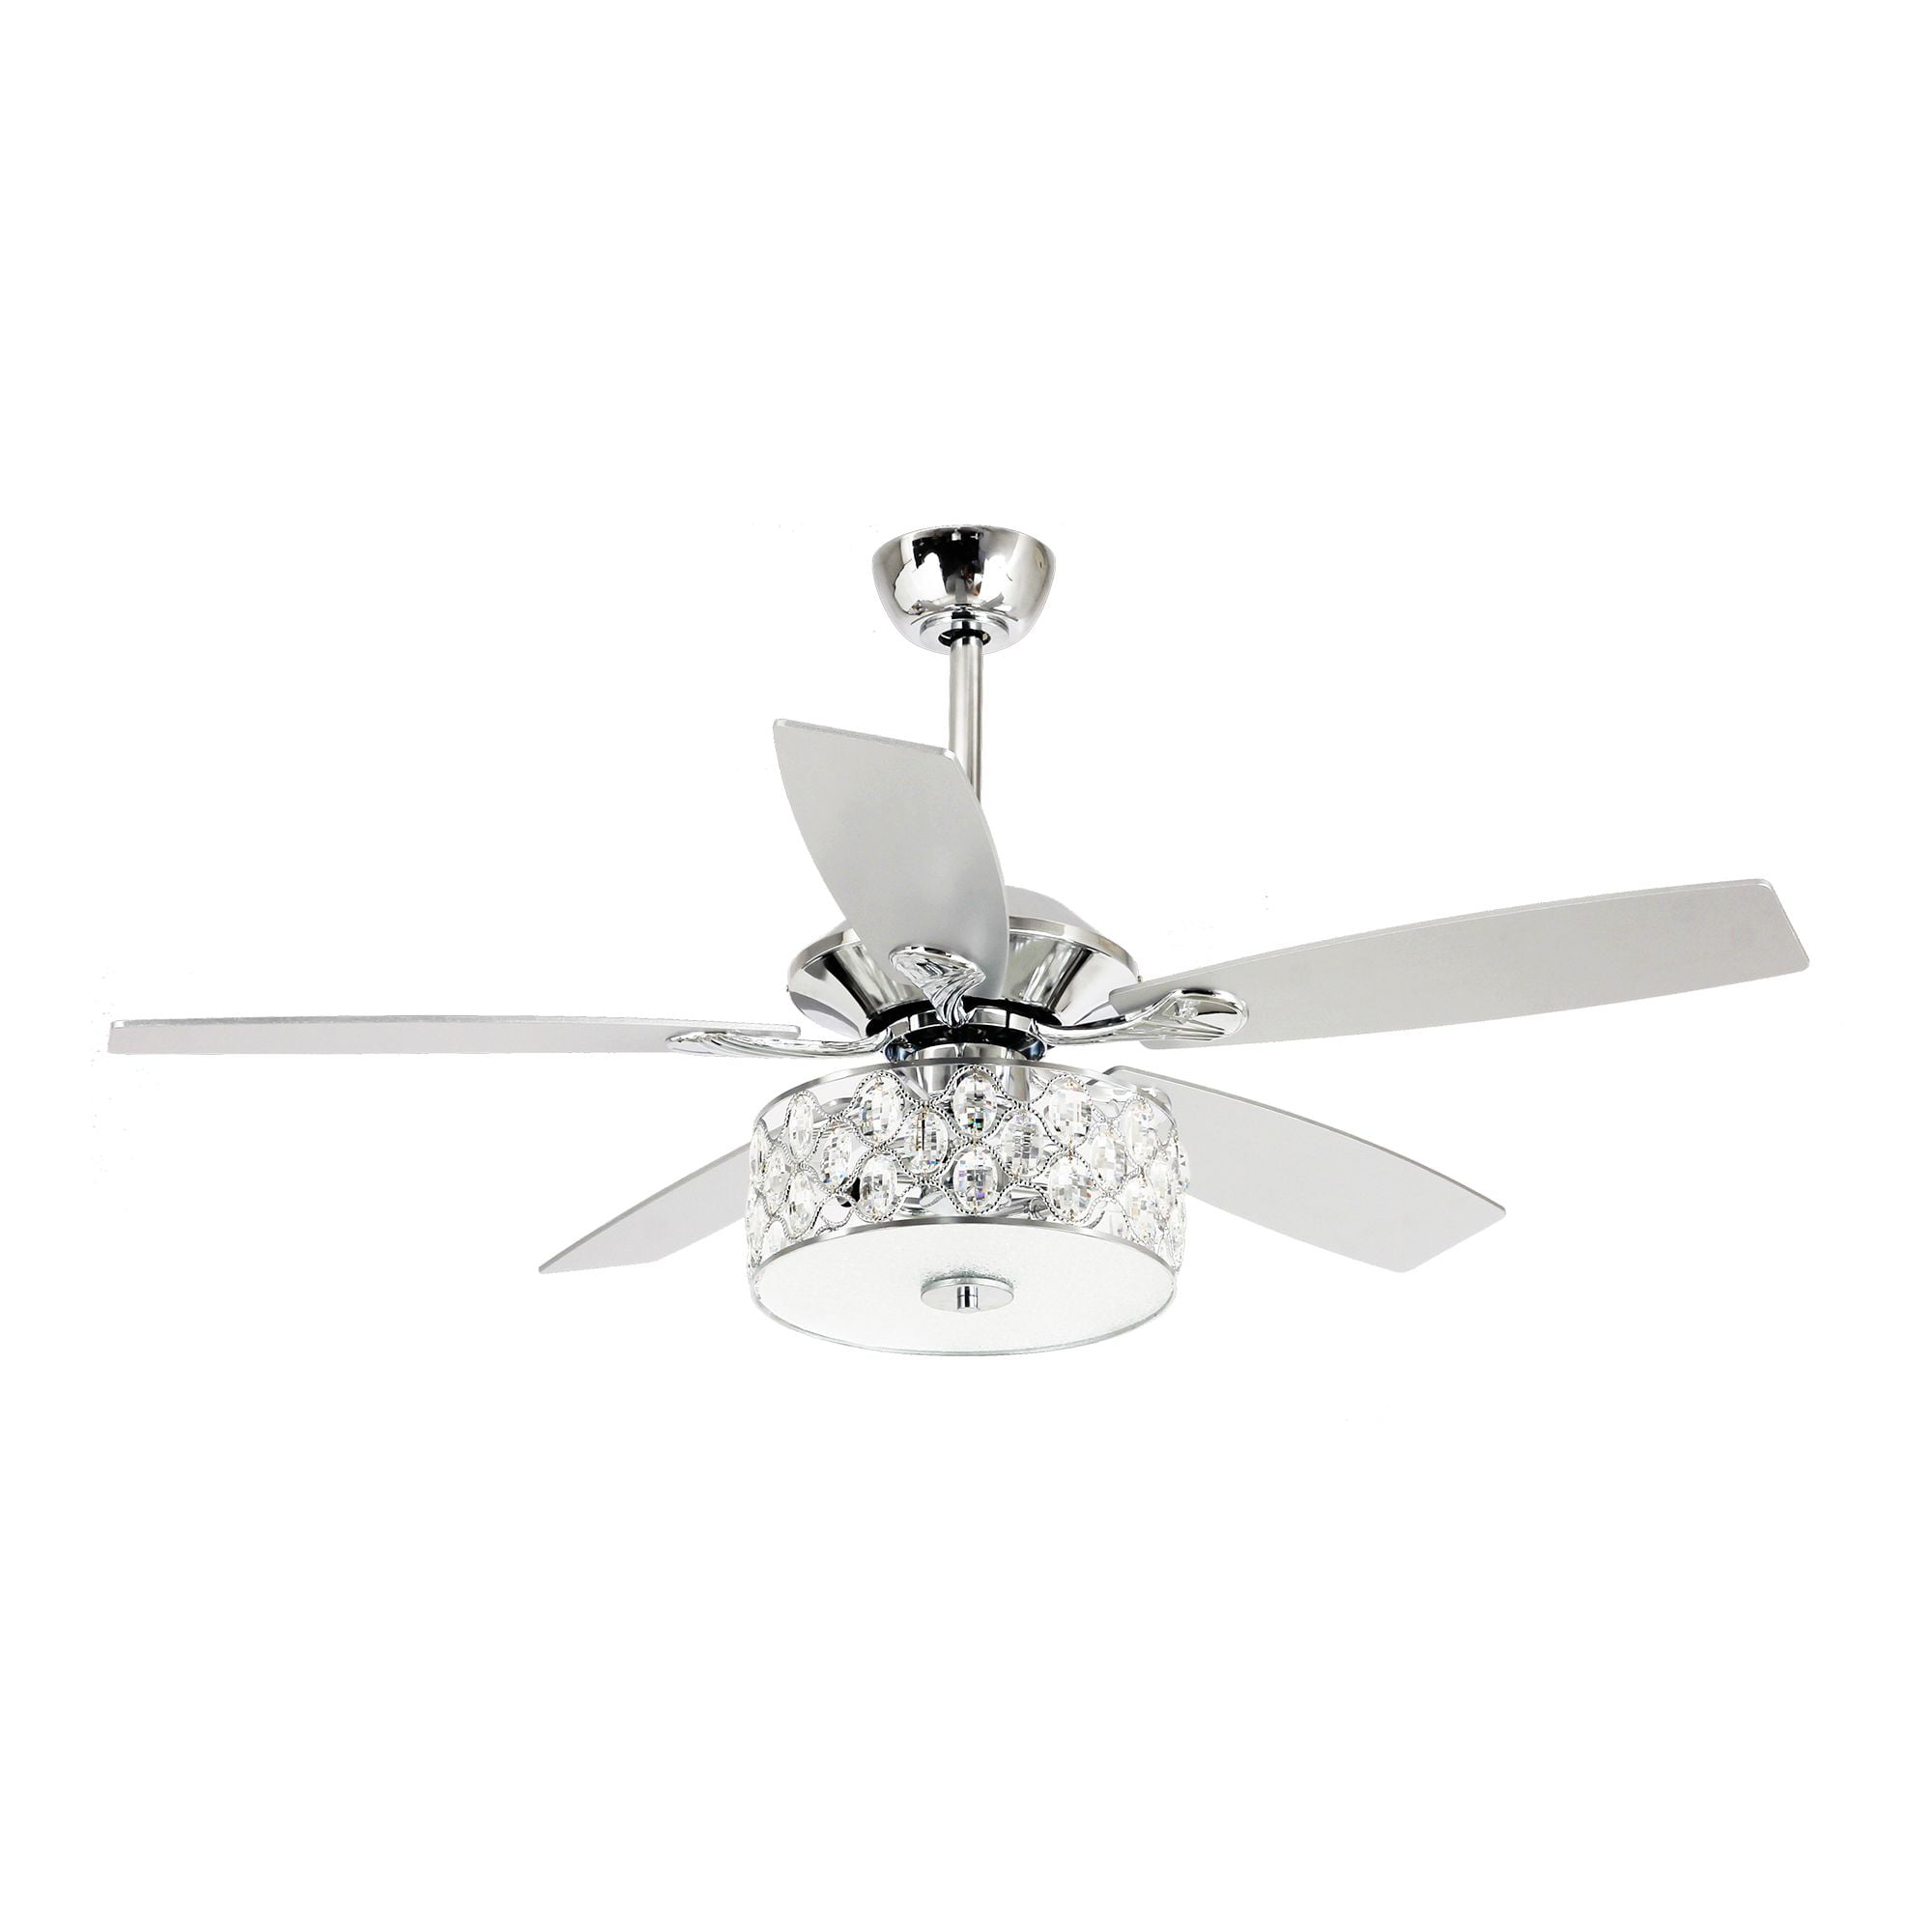 GLF 52" Ceiling Fan With Light Simple Reversible Remote Control Chandelier Decor 